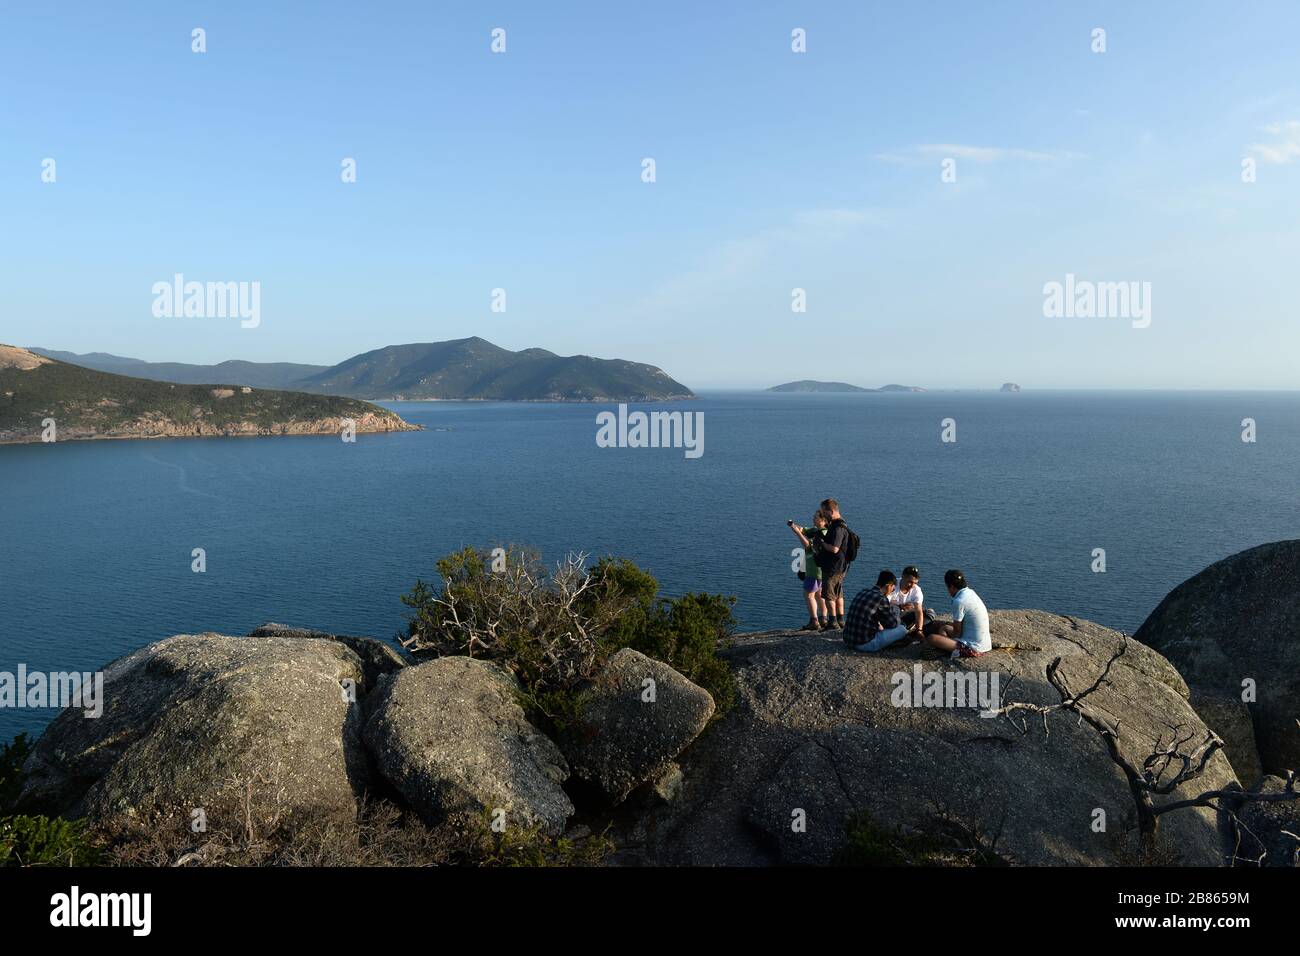 Group of young men  play cards on hilltop overlooking bay while a young couple take photos of the view Stock Photo